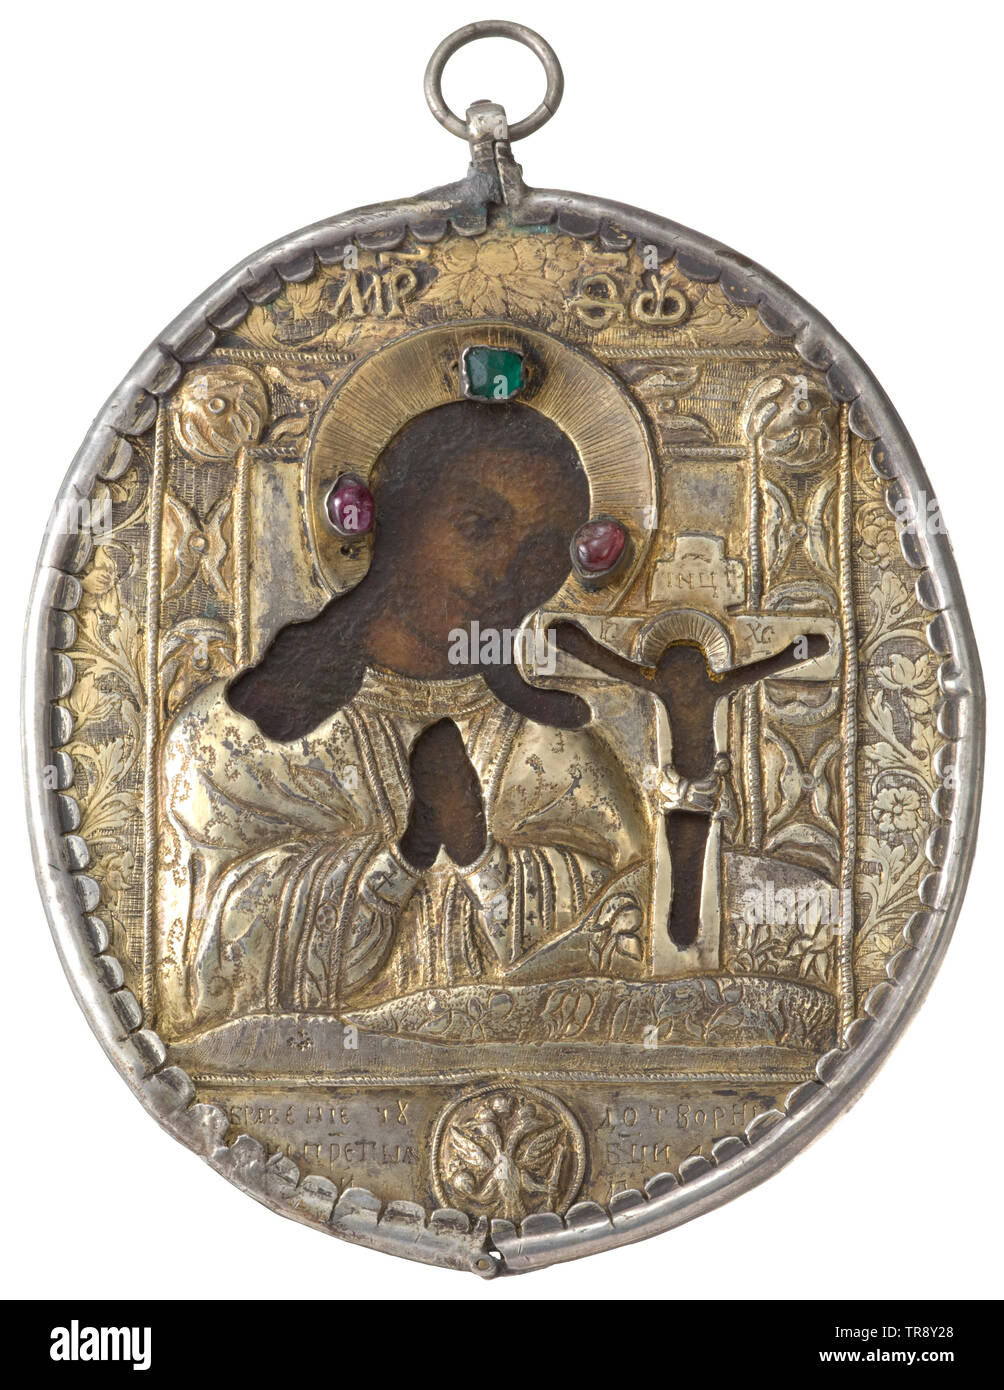 An important Russian gilt panagia, 1st third of the 18th century Hand painted, gilt silver, engraved, chased, studded with precious stones (ruby cabochons) and glass. The obverse portraying Mary and Christ, at bottom the Russian double eagle with Cyrillic inscription. The reverse with the depiction of Archangel Michael, St. Nicholas, and Archangel Gabriel. Painting minimally restored. In a case of later date. historic, historical, Additional-Rights-Clearance-Info-Not-Available Stock Photo